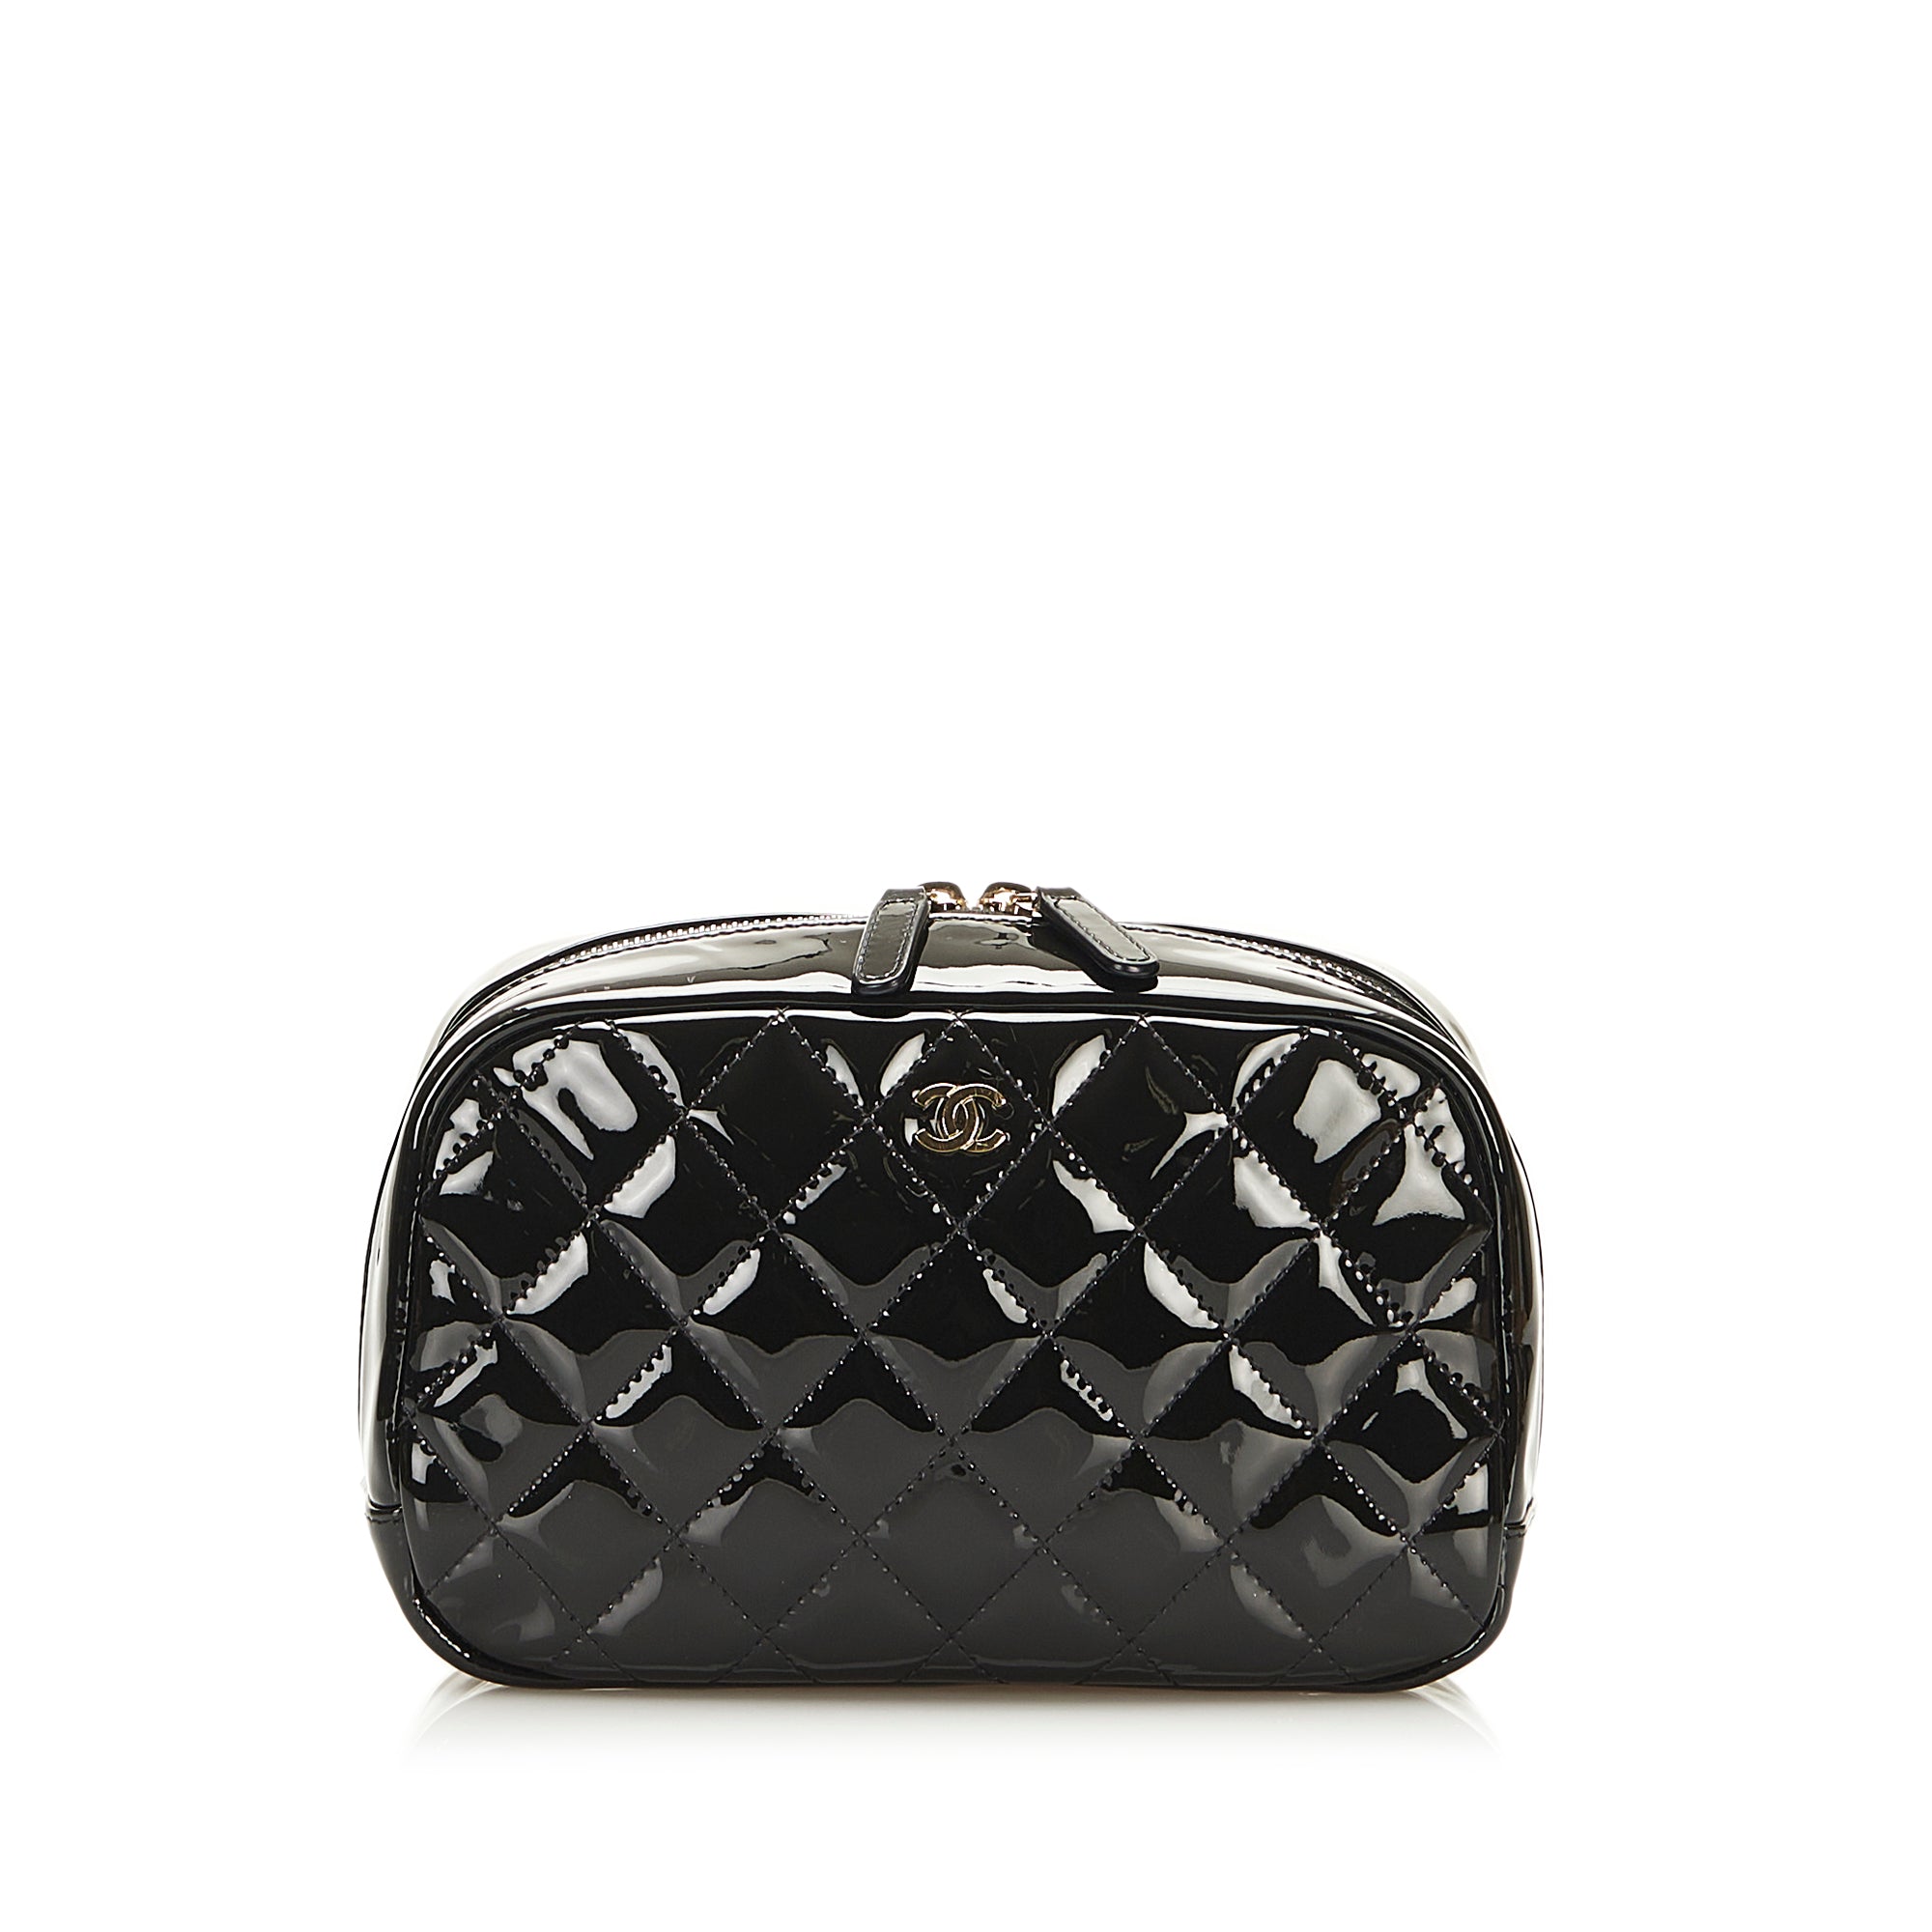 Chanel White Cosmetic Pouch